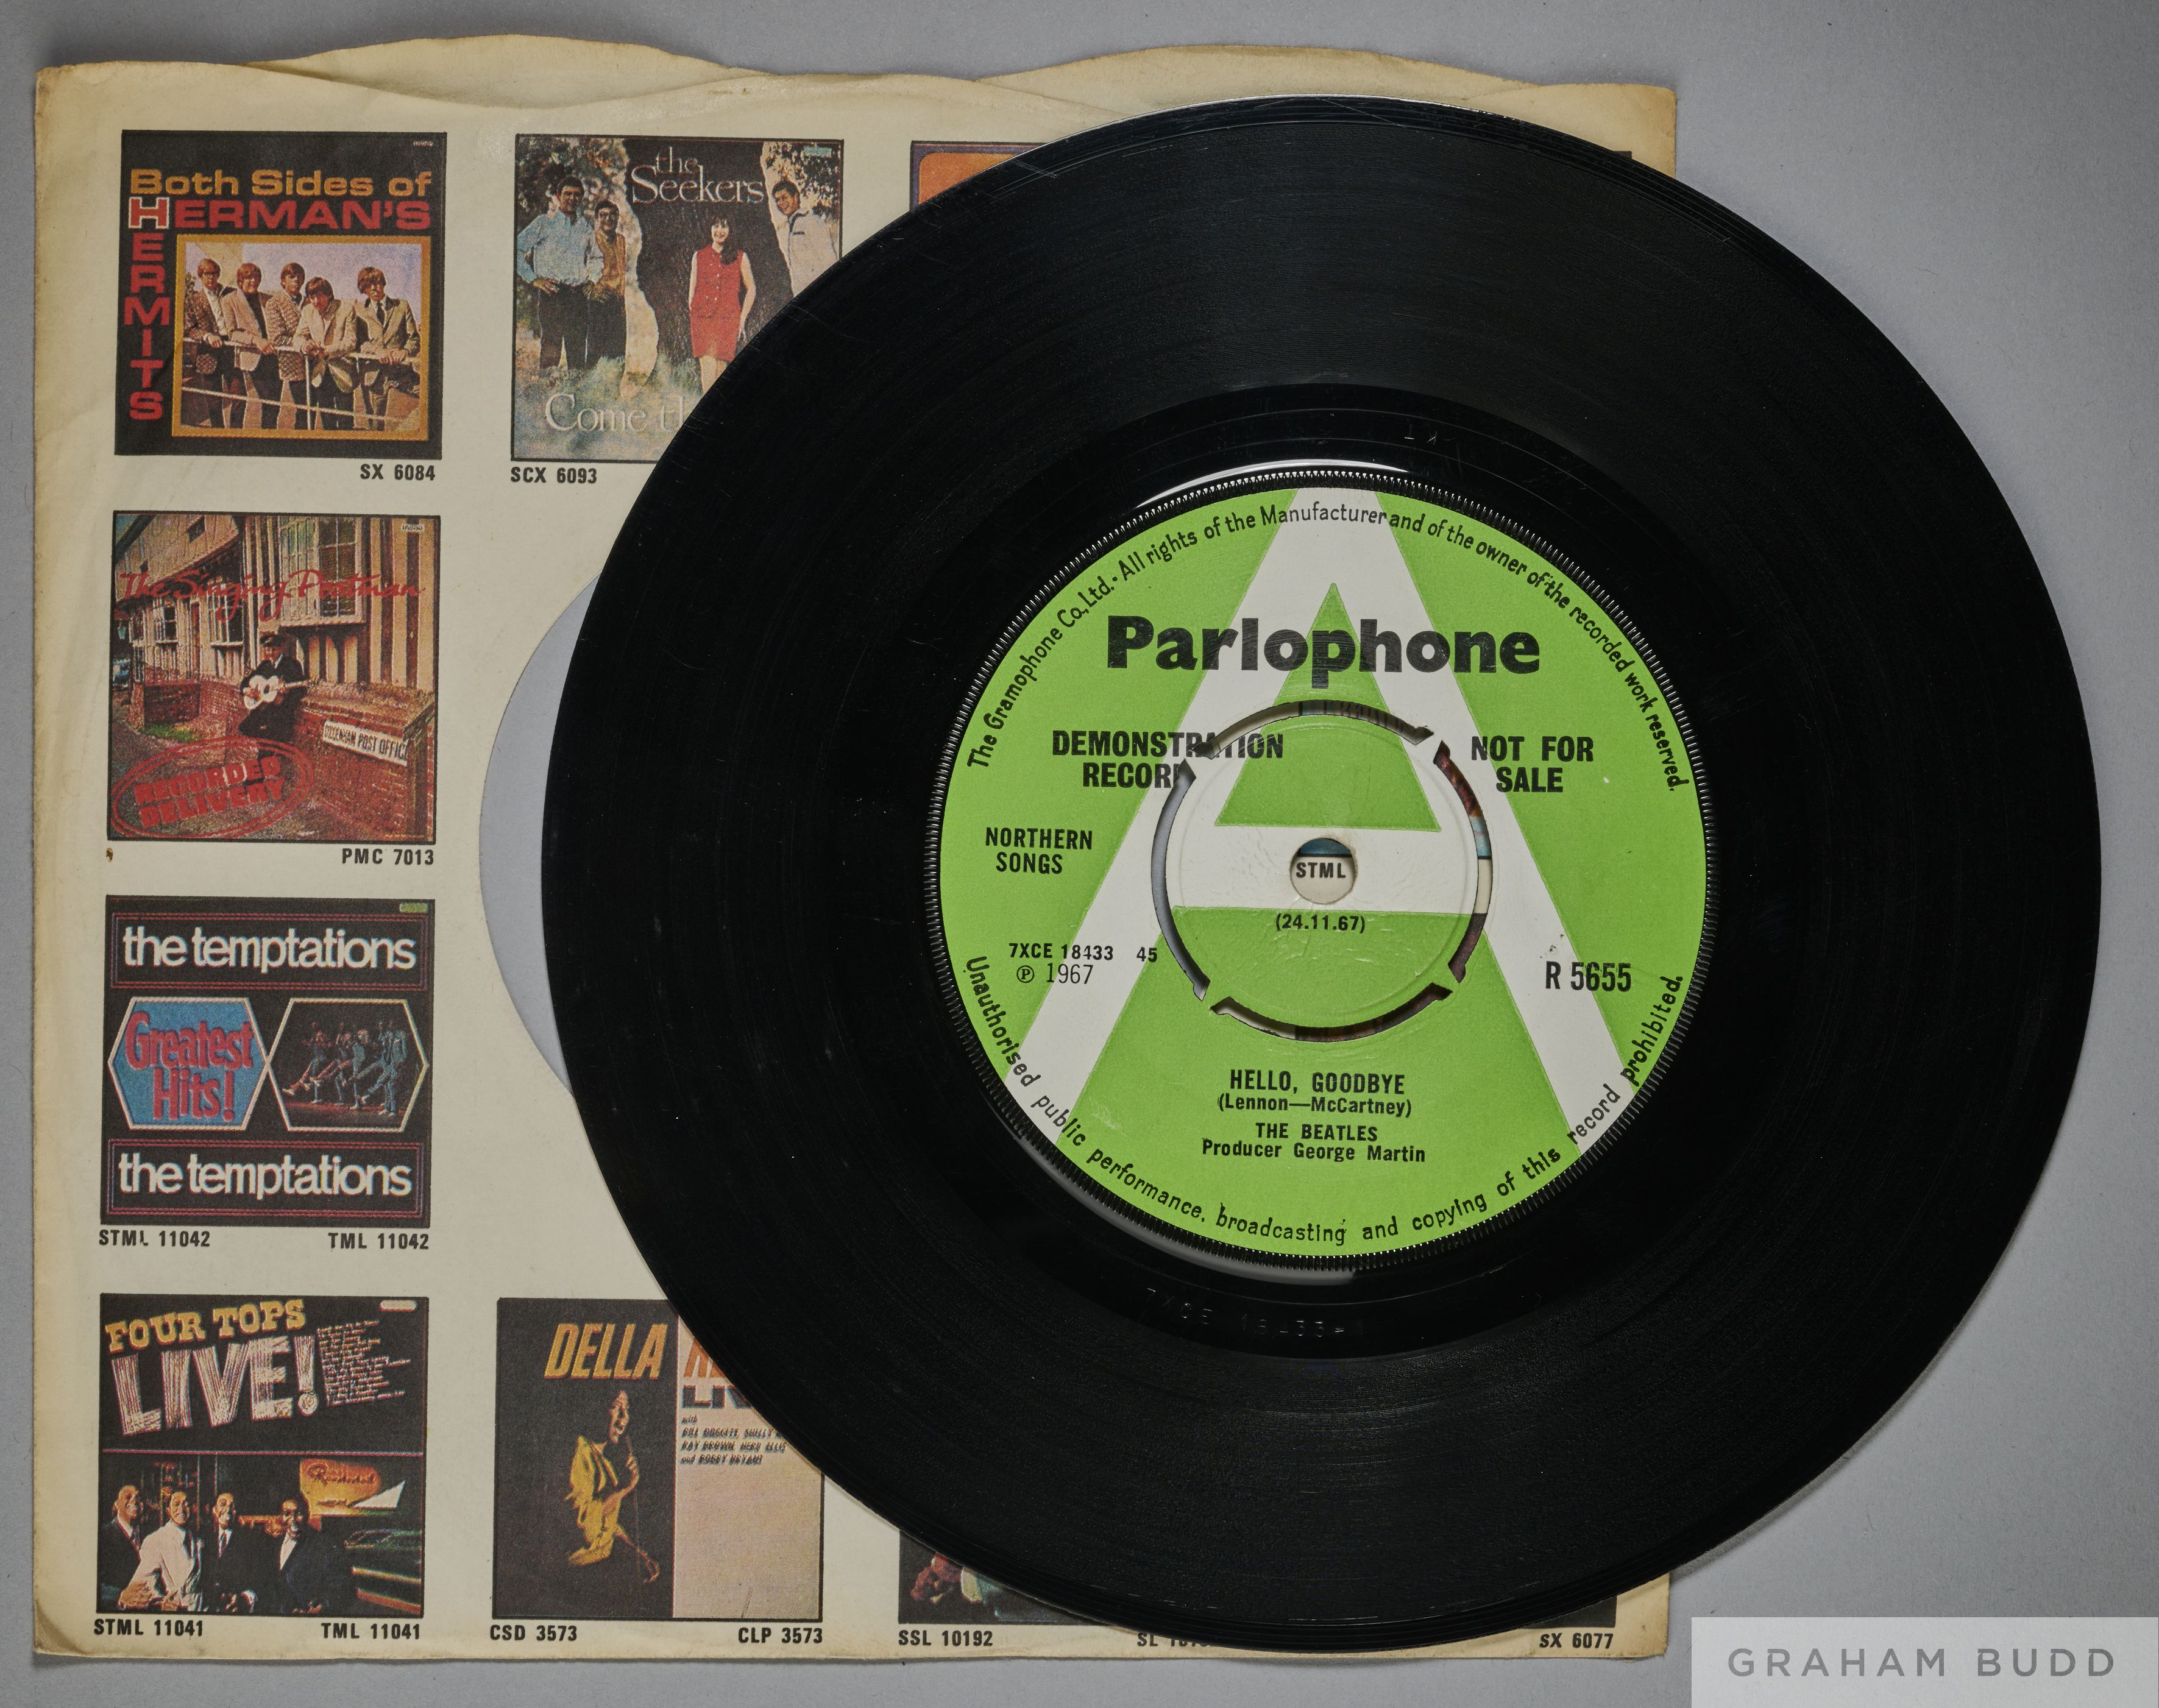 An extremely rare copy of The Beatles' Hello Goodbye 1967 A Label UK demonstration copy R 5655